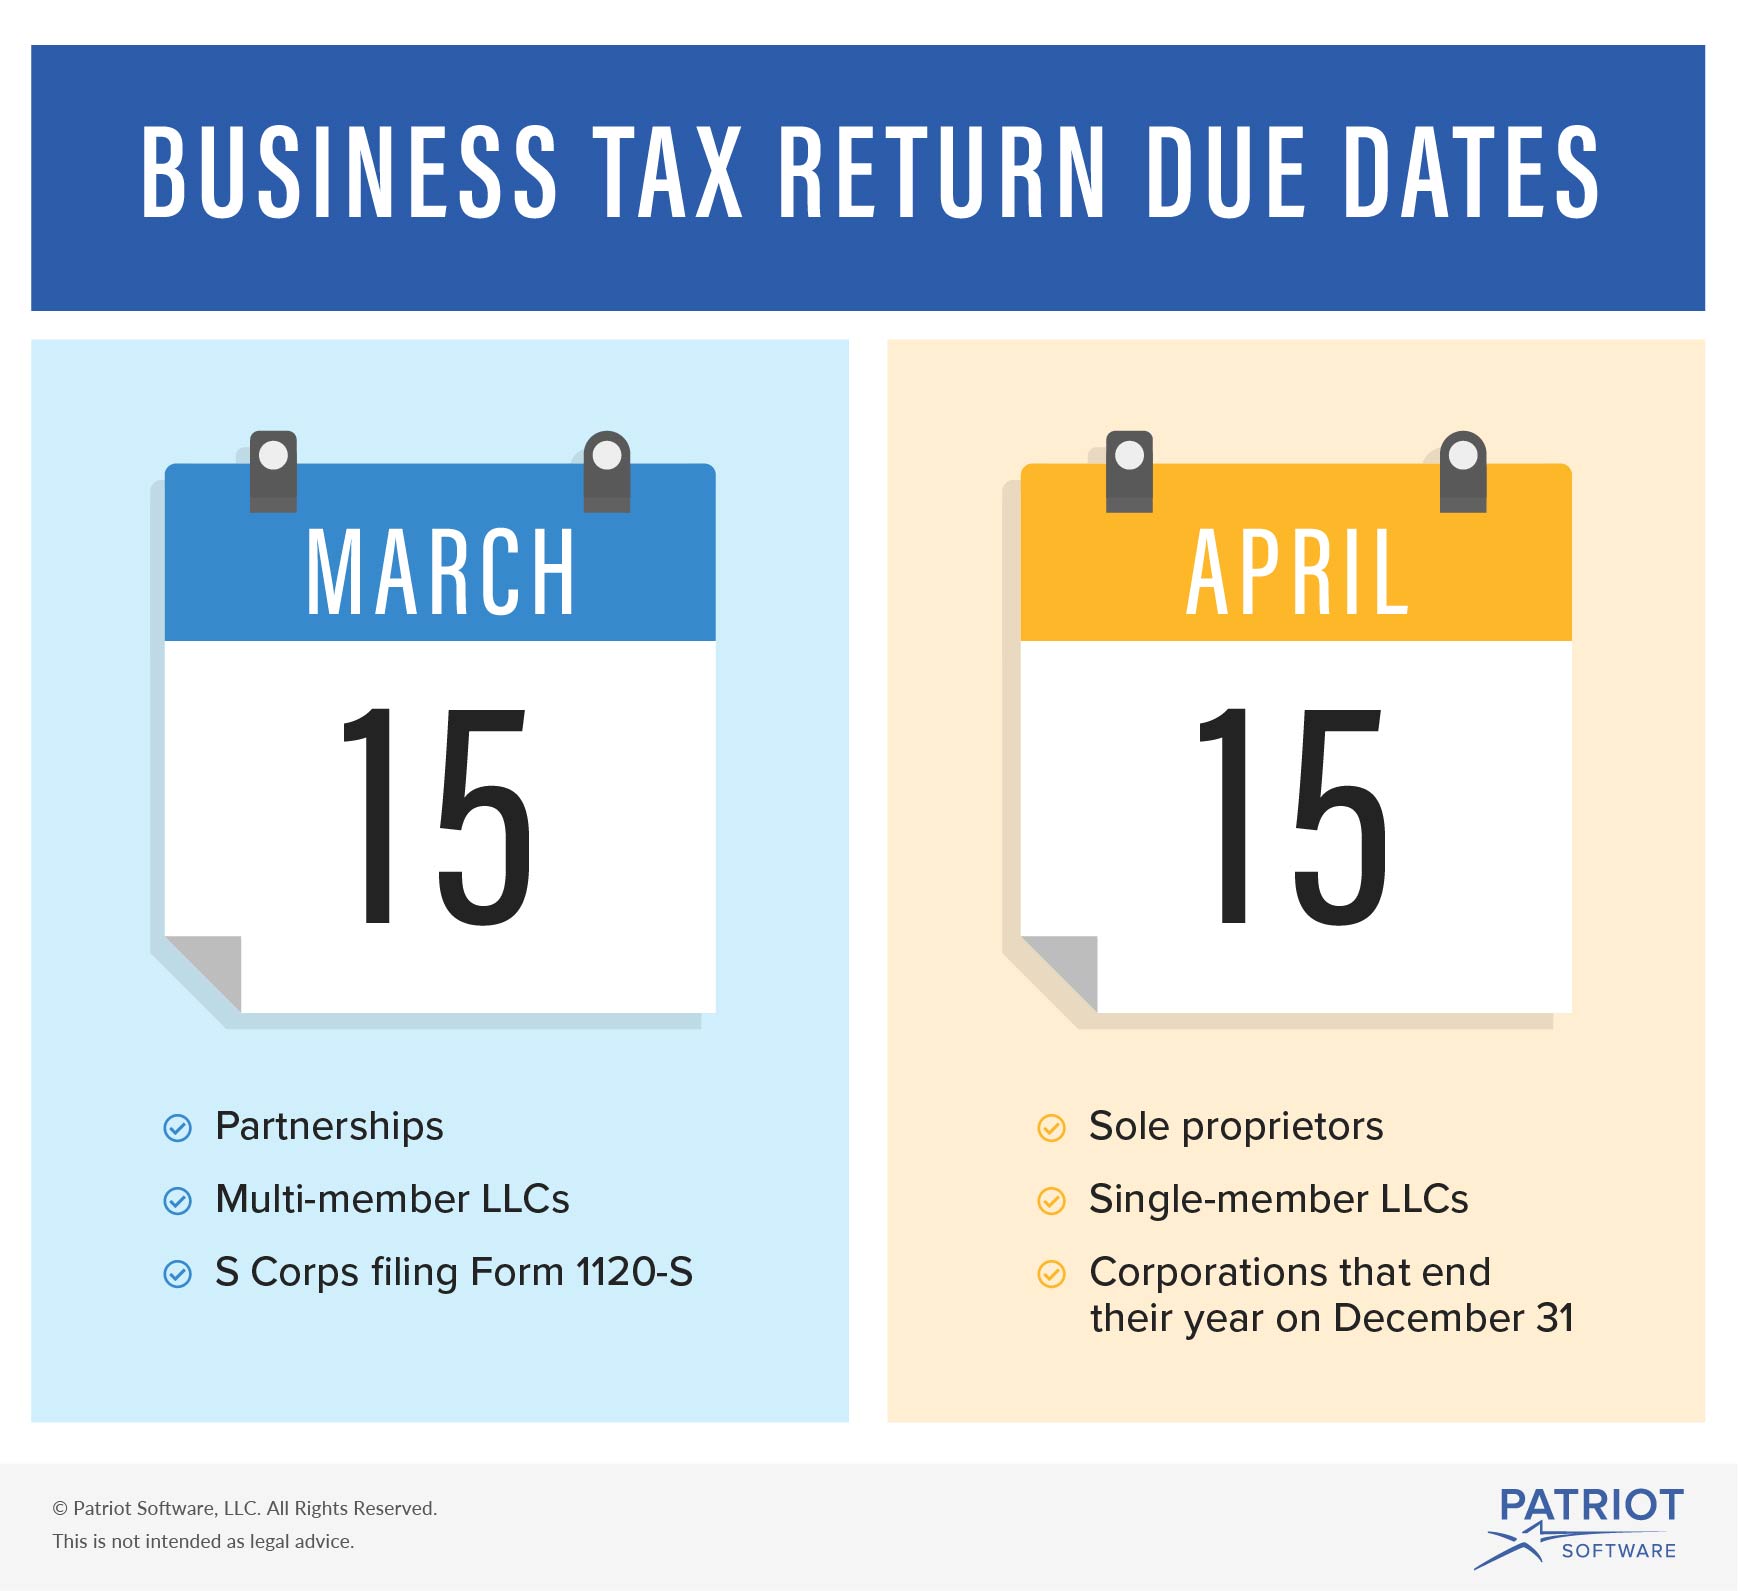 Business Tax Return Due Date by Company Structure